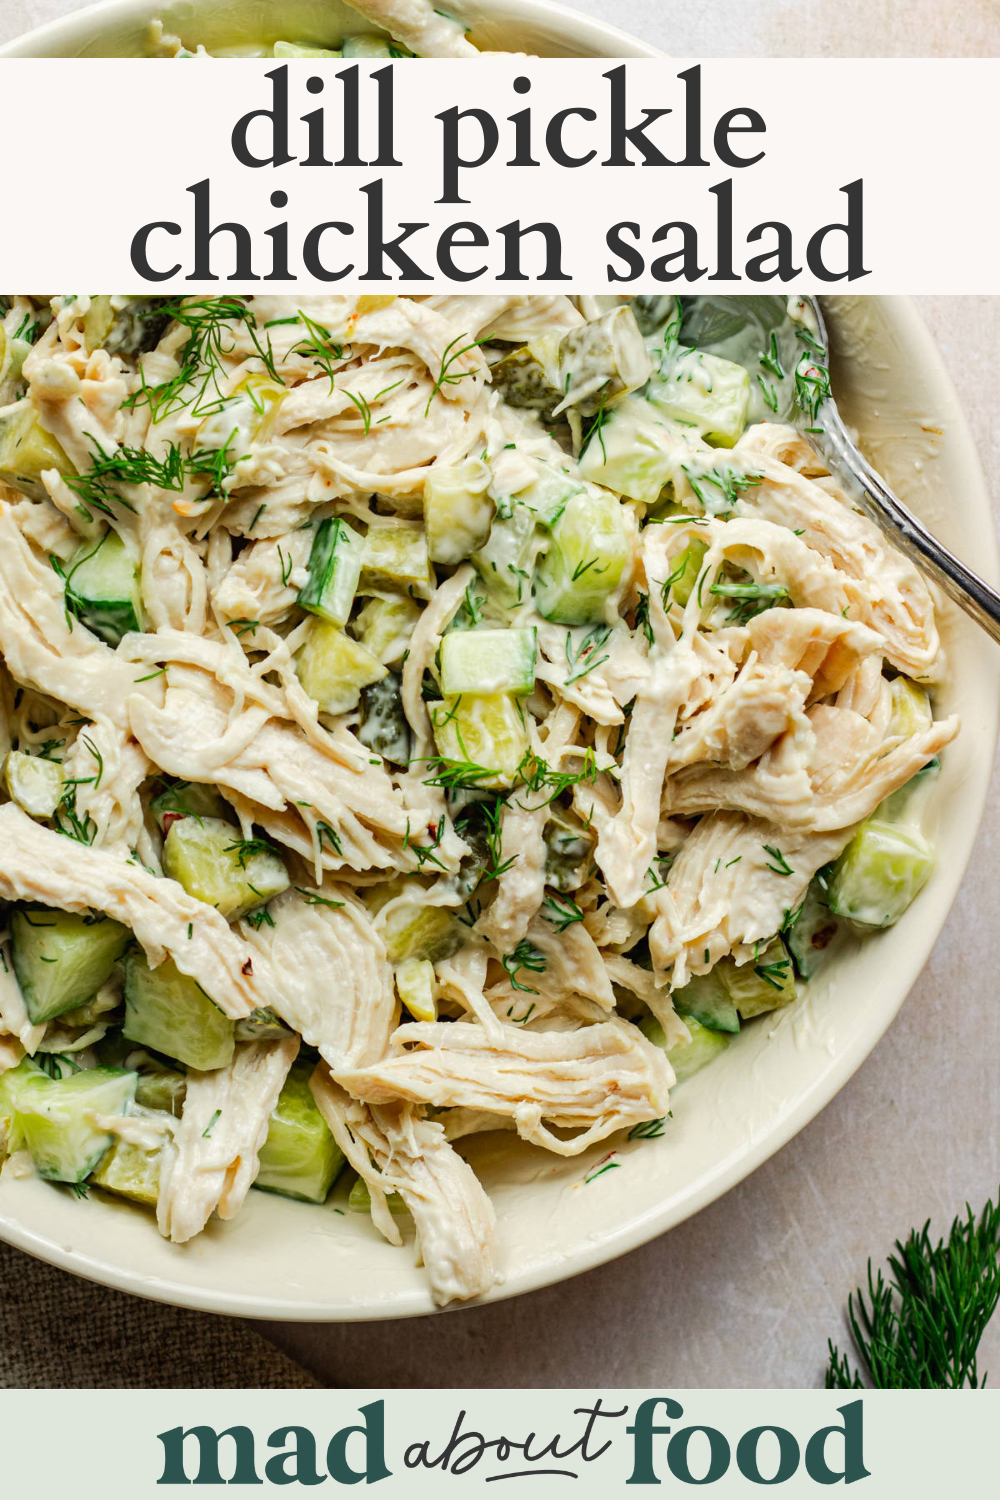 Image for pinning dill pickle chicken salad recipe on Pinterest